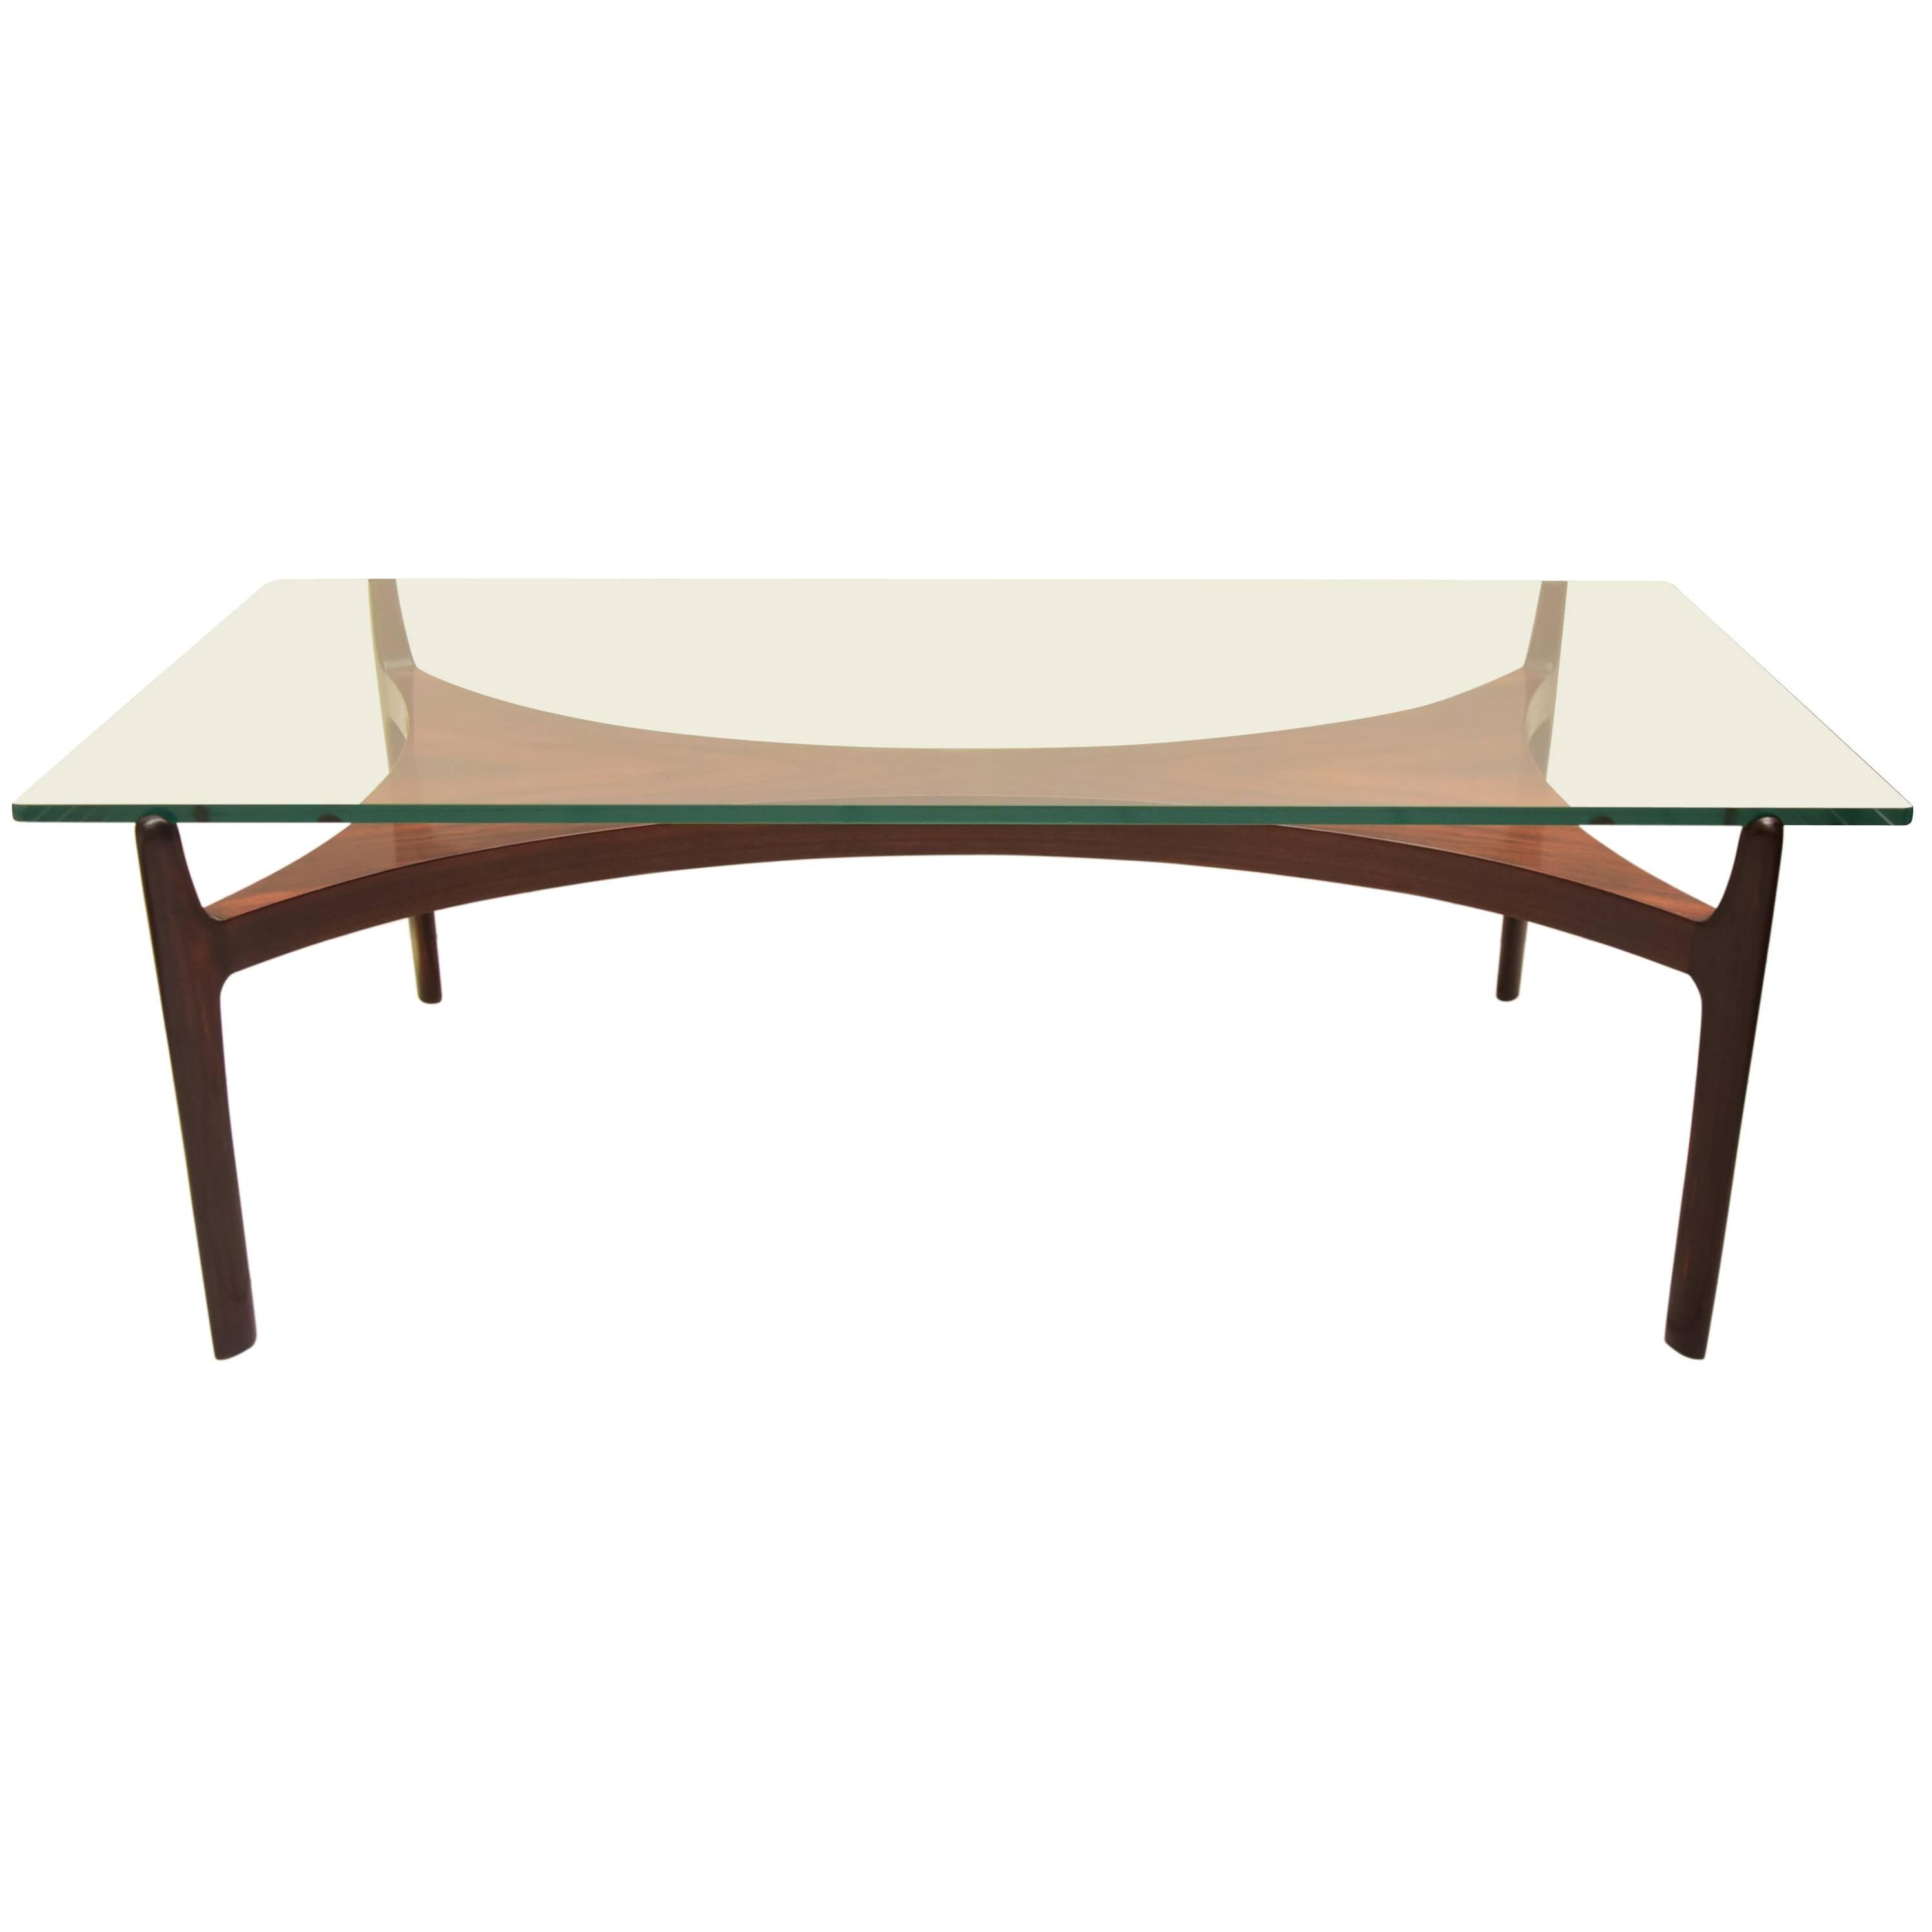 Rare Rosewood and Glass Coffee Table by Sven Ellekaer for Christian Linneberg